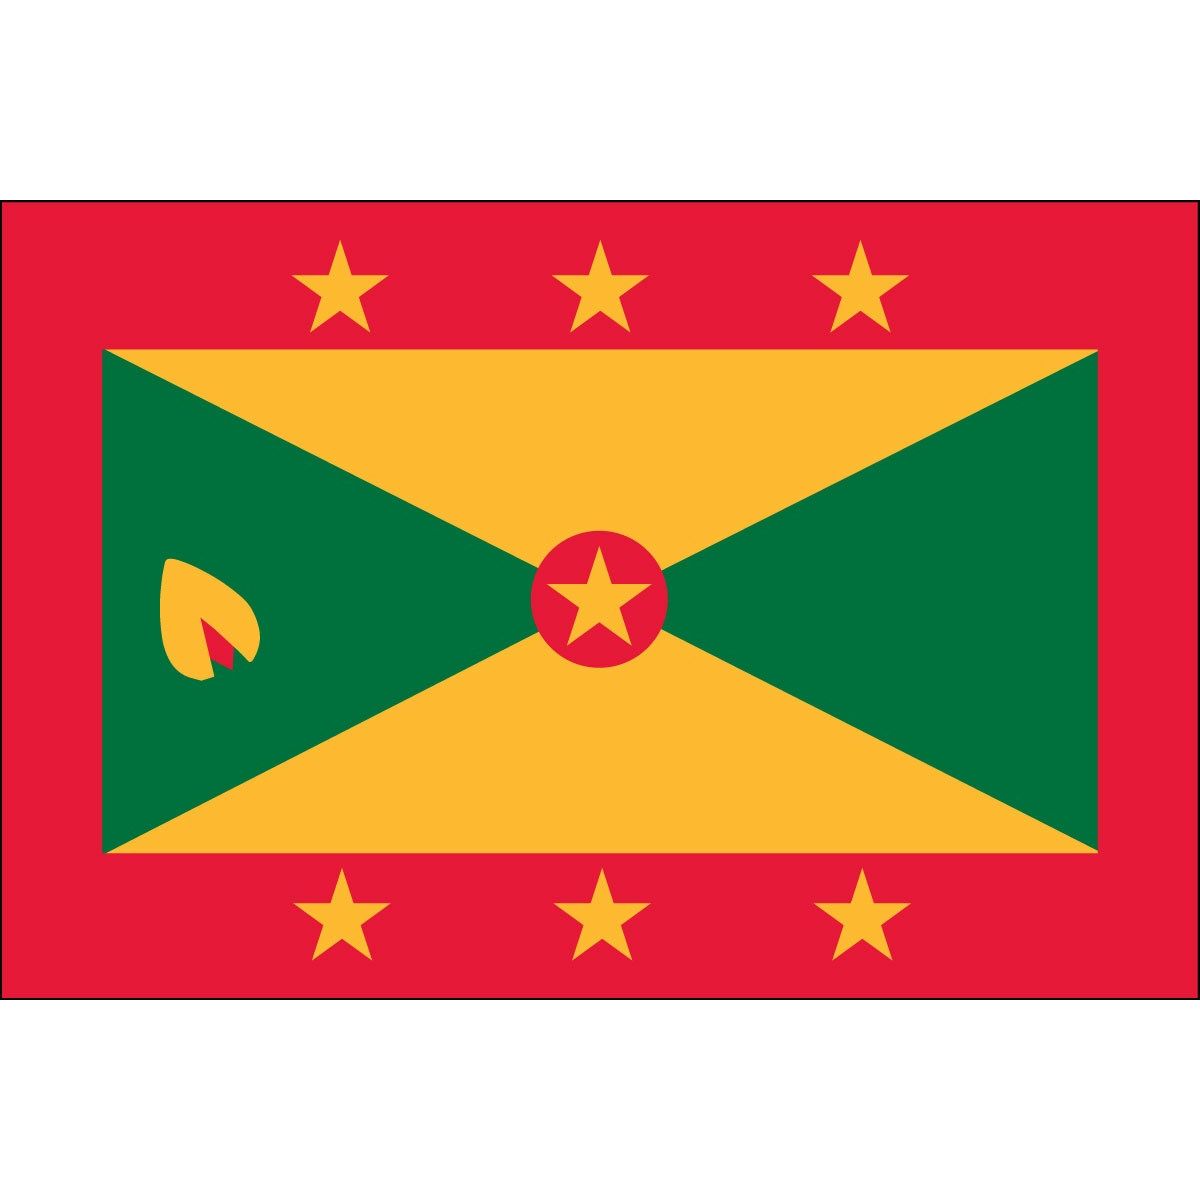  Guadeloupe Flag 3' x 5' for a pole - French region of